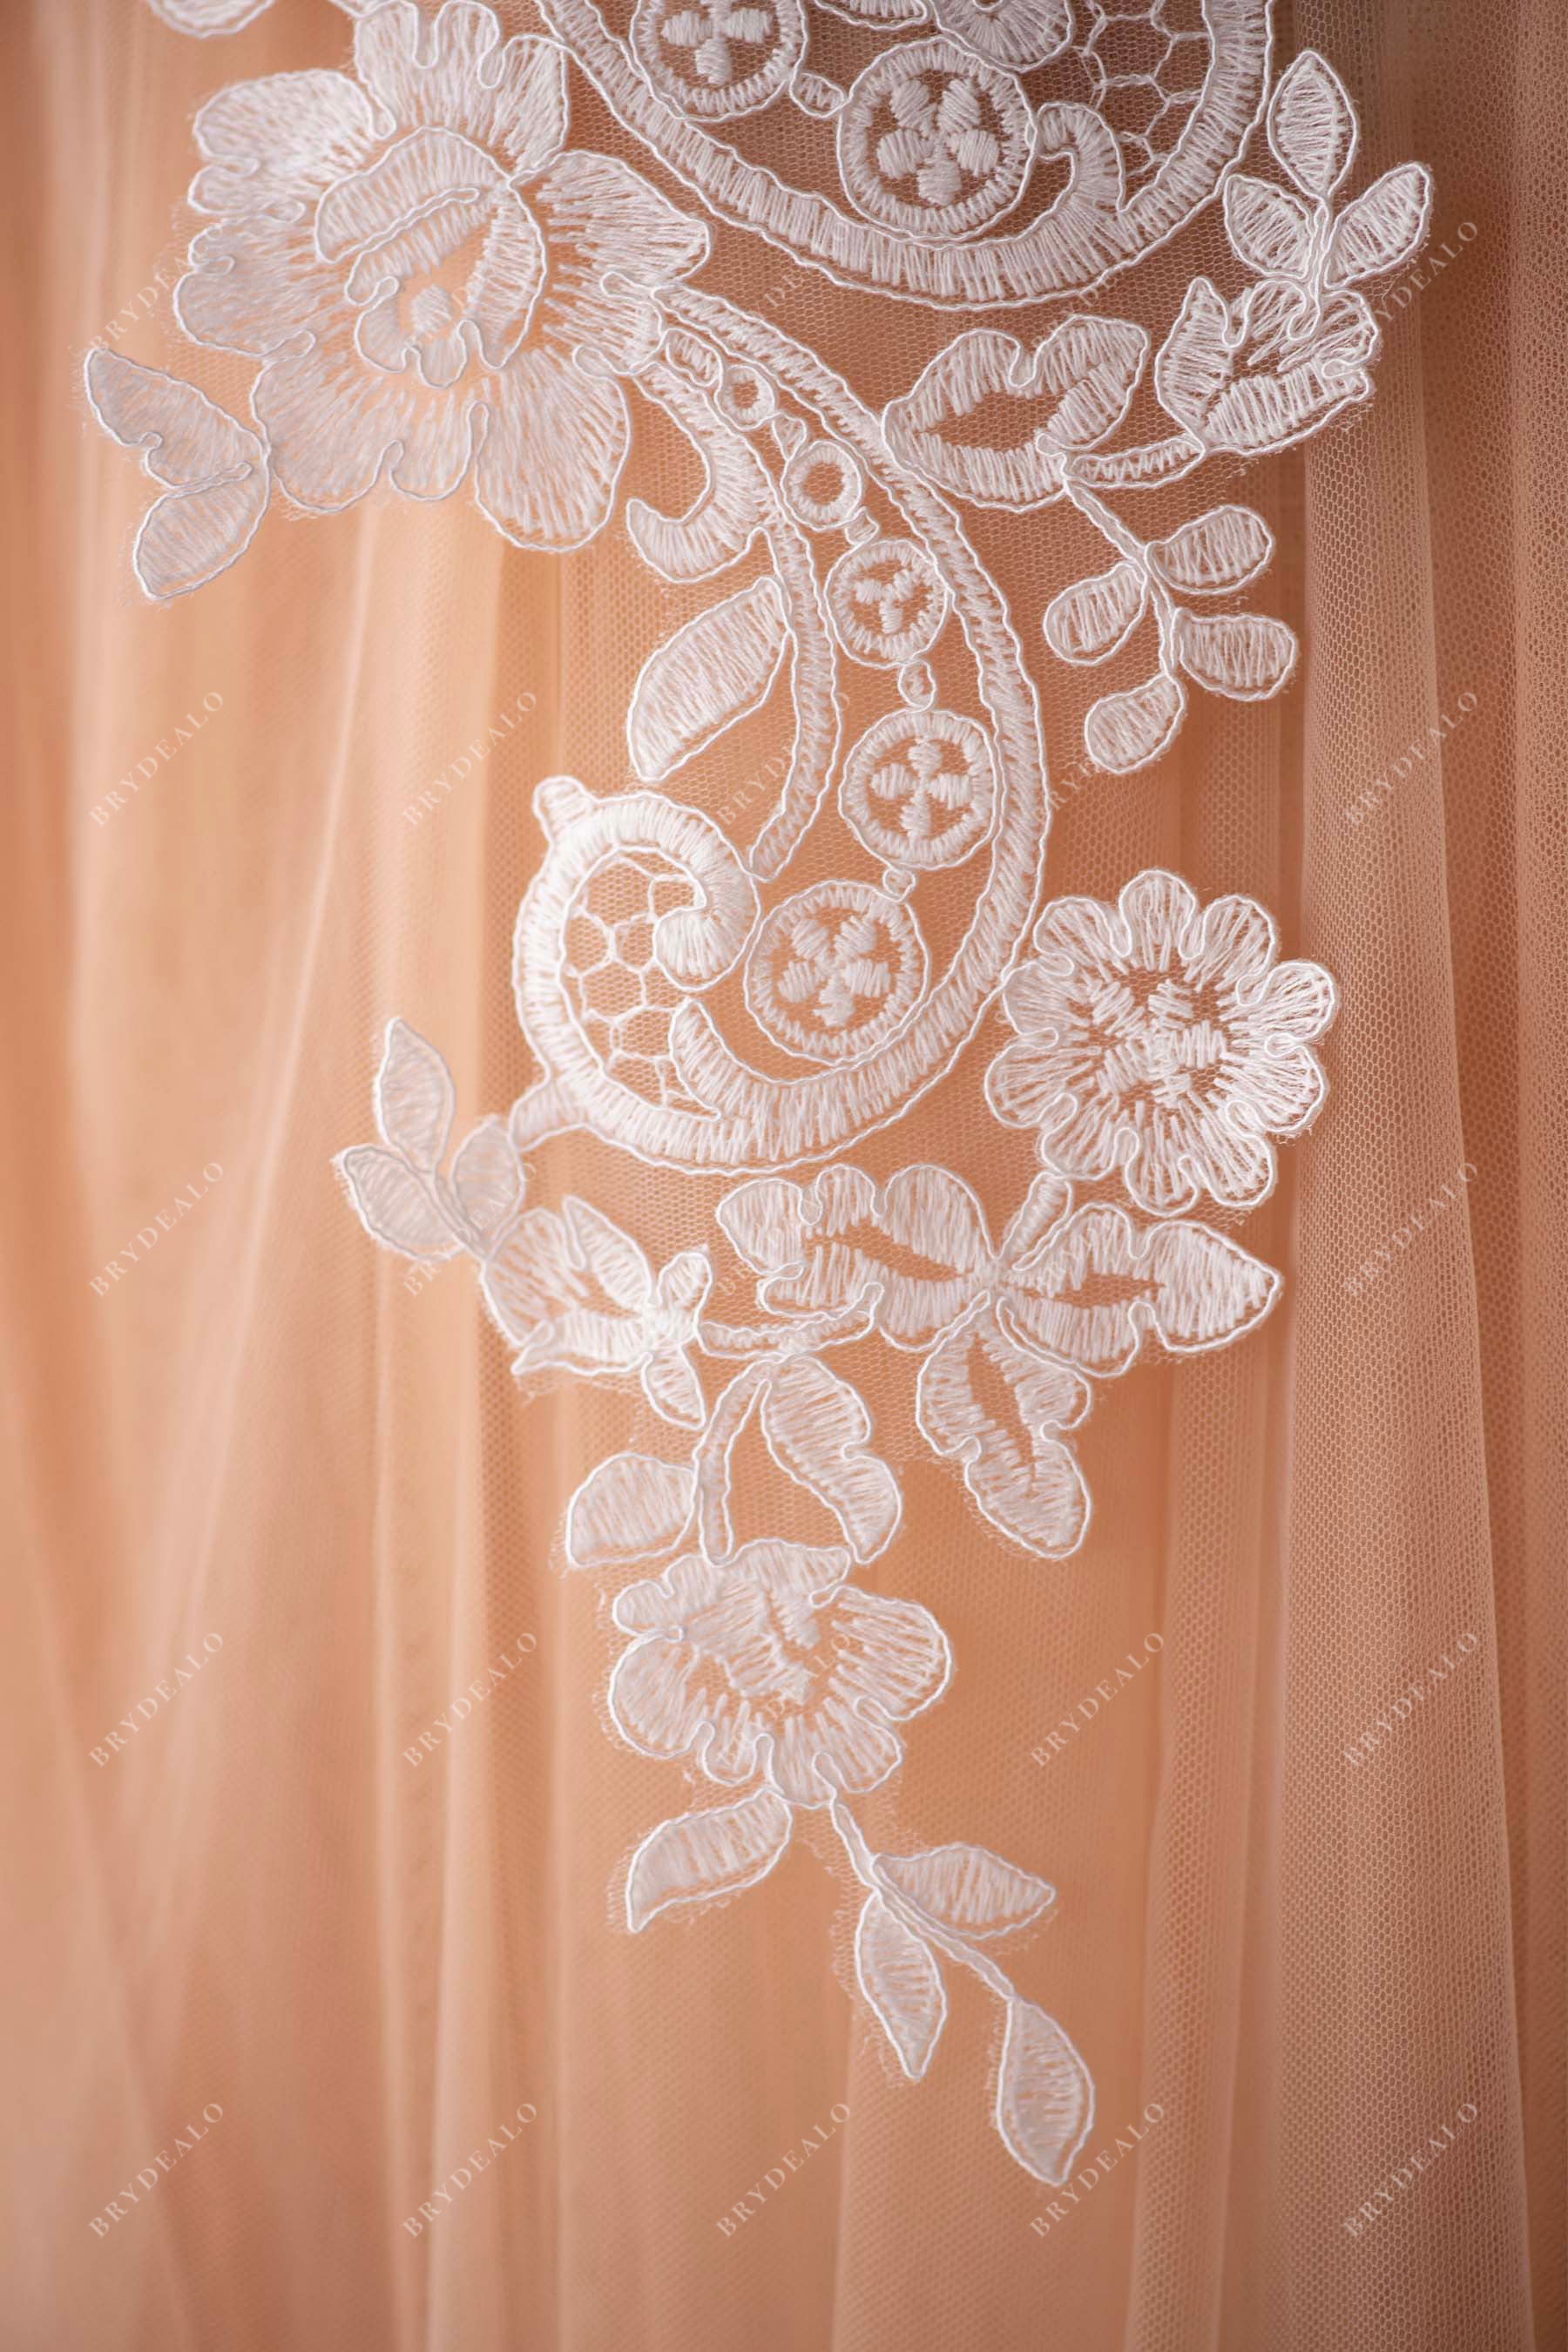 embroidery bridal lace applique for wedding dress